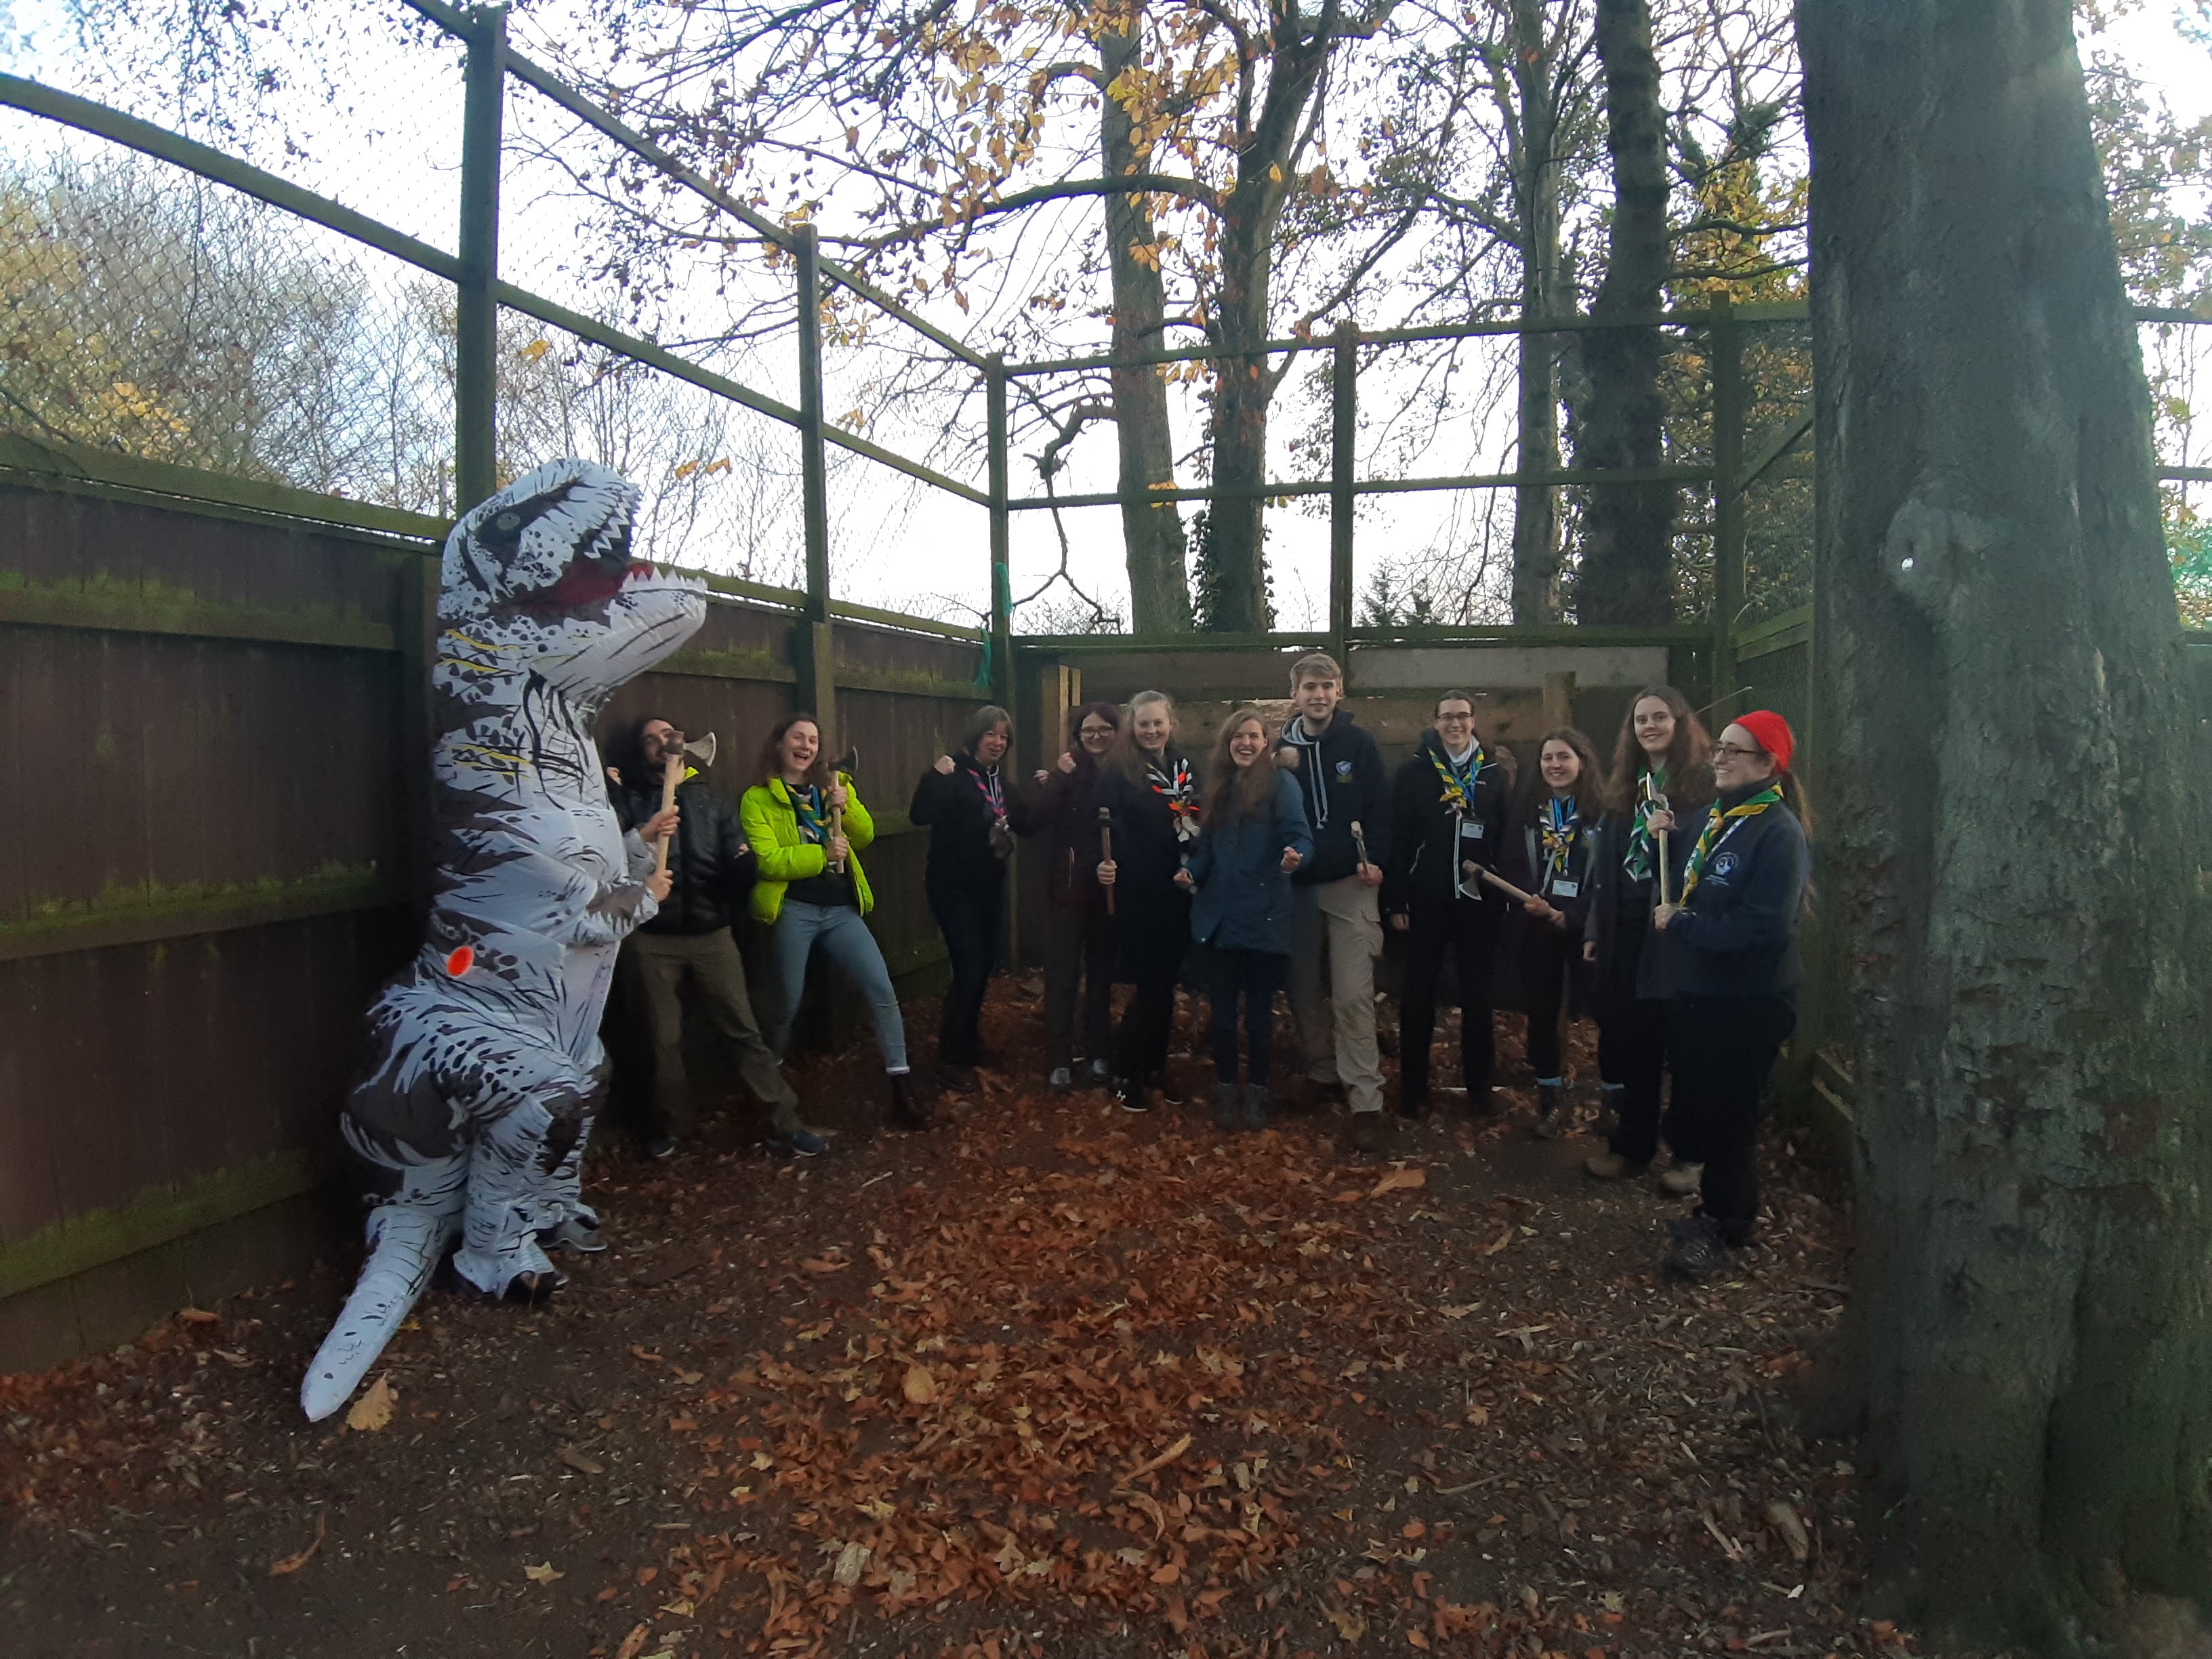 Small group photo from those doing the Viking Weapons Training activity, stood in a range, with an inflatable dinosaur also present